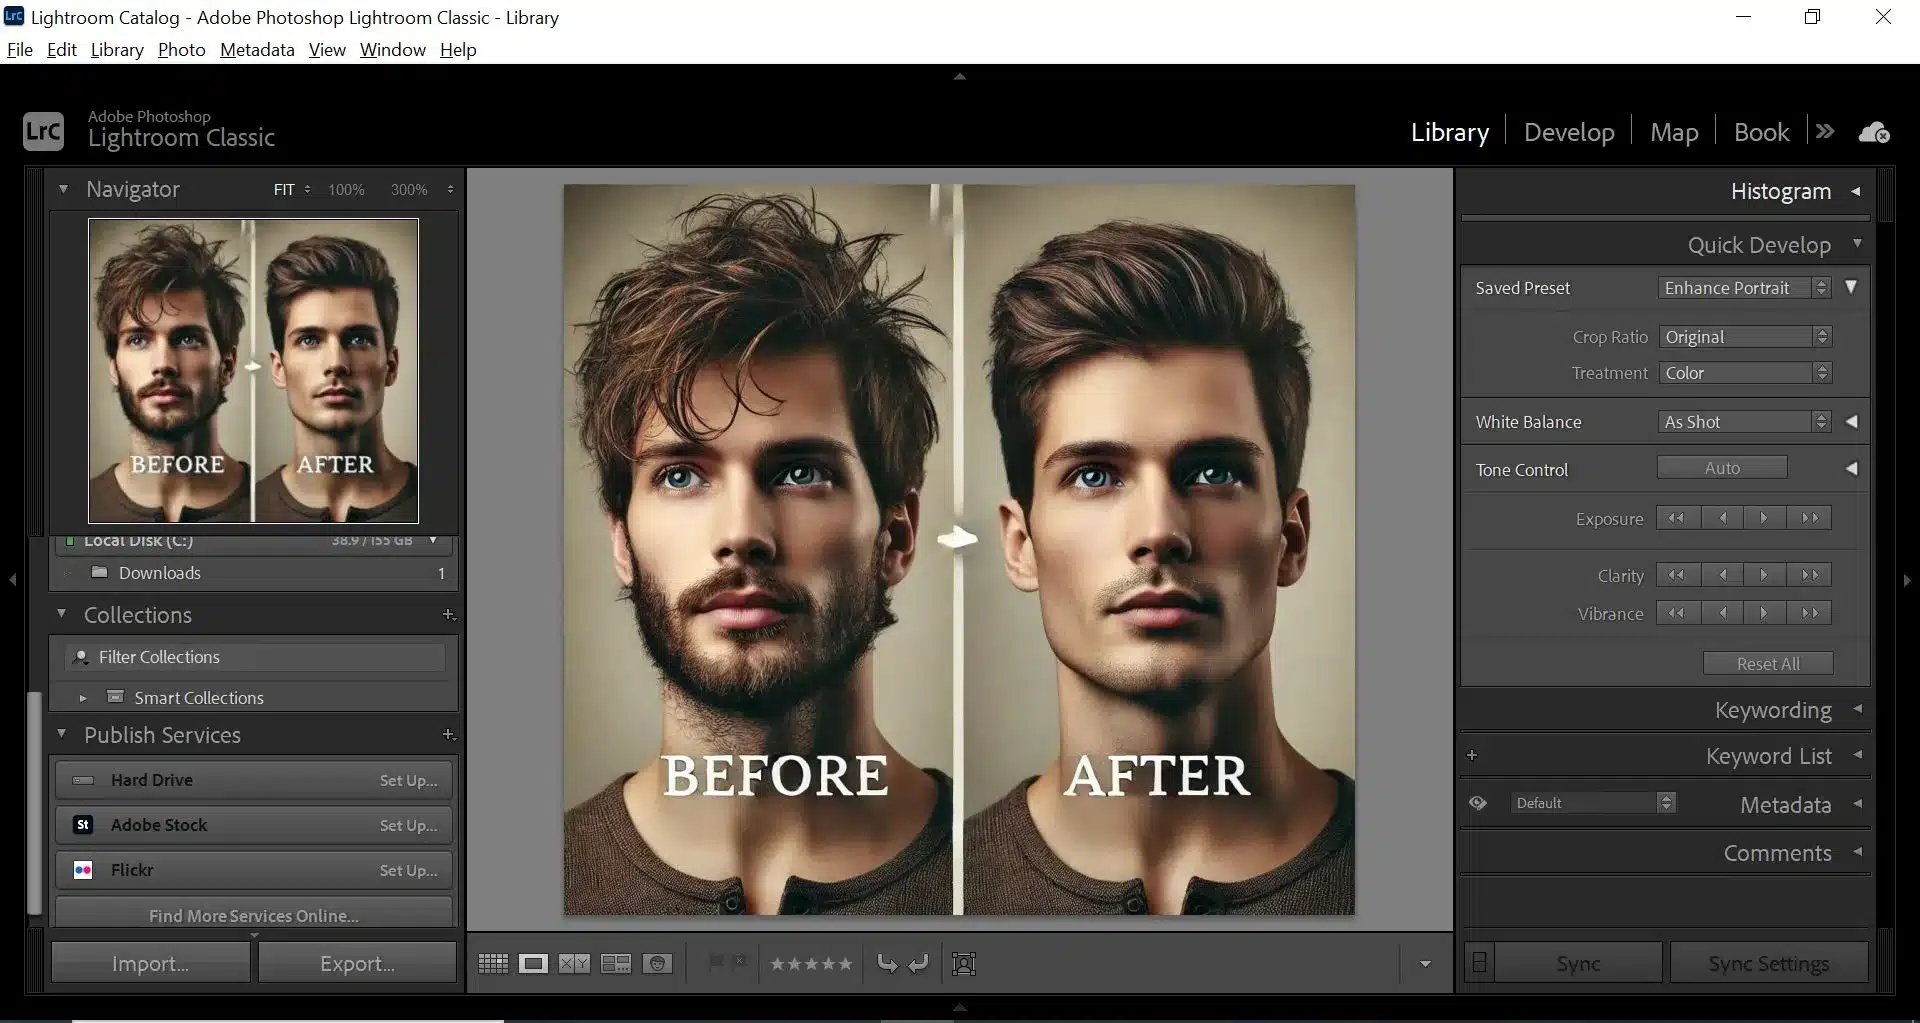 Adobe Lightroom interface displaying a before and after comparison of a man's portrait, highlighting the beautifying process. Various editing tools and panels are visible.